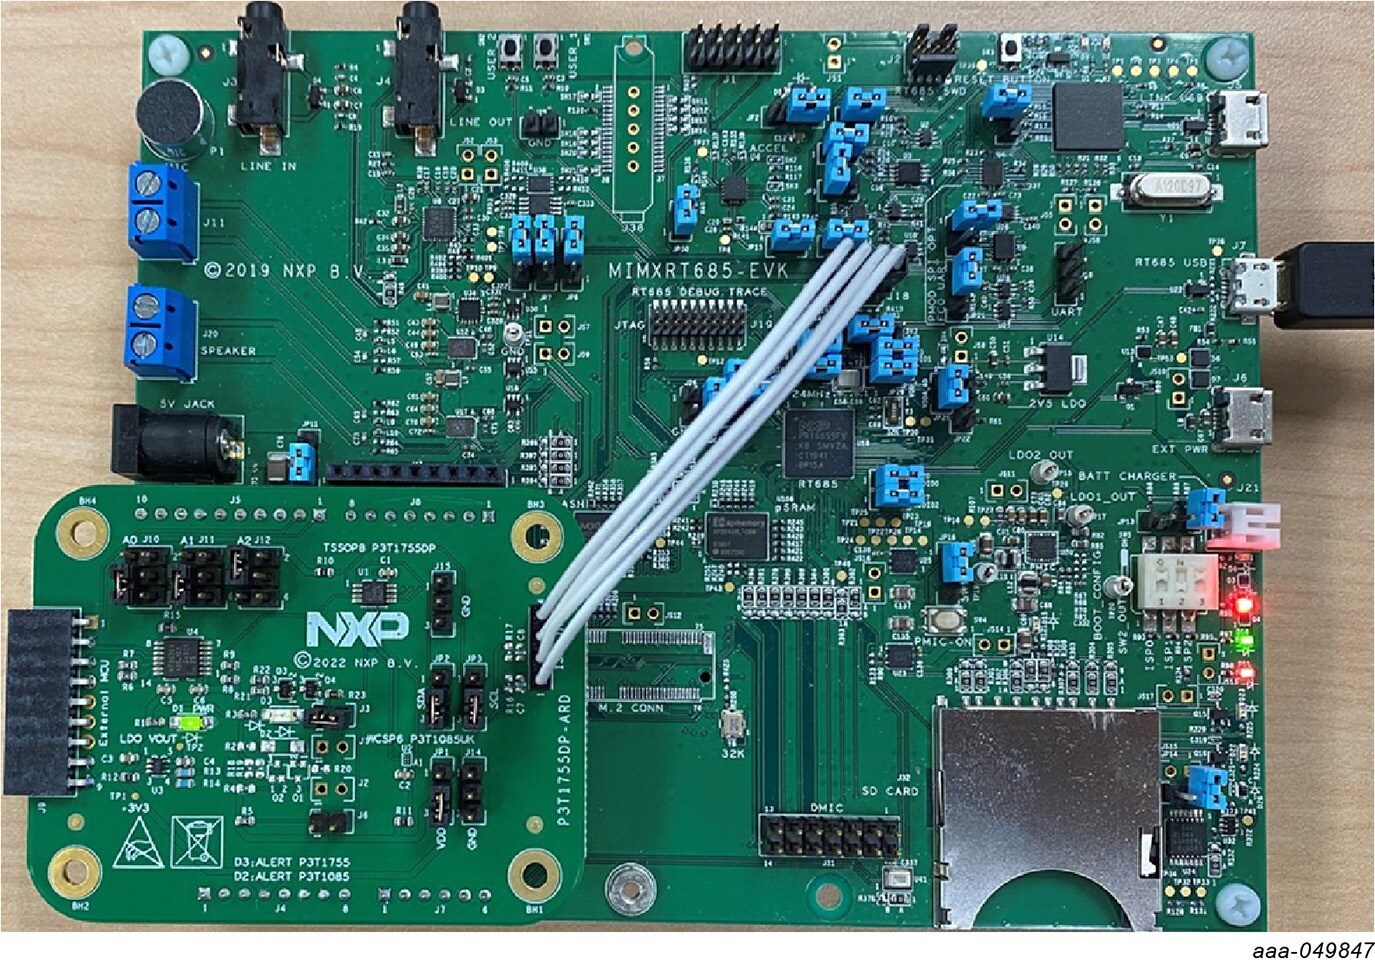 Figure 3. P3T1755DP-ARD evaluation board connecting to the MIMXRT685-EVK MCU board